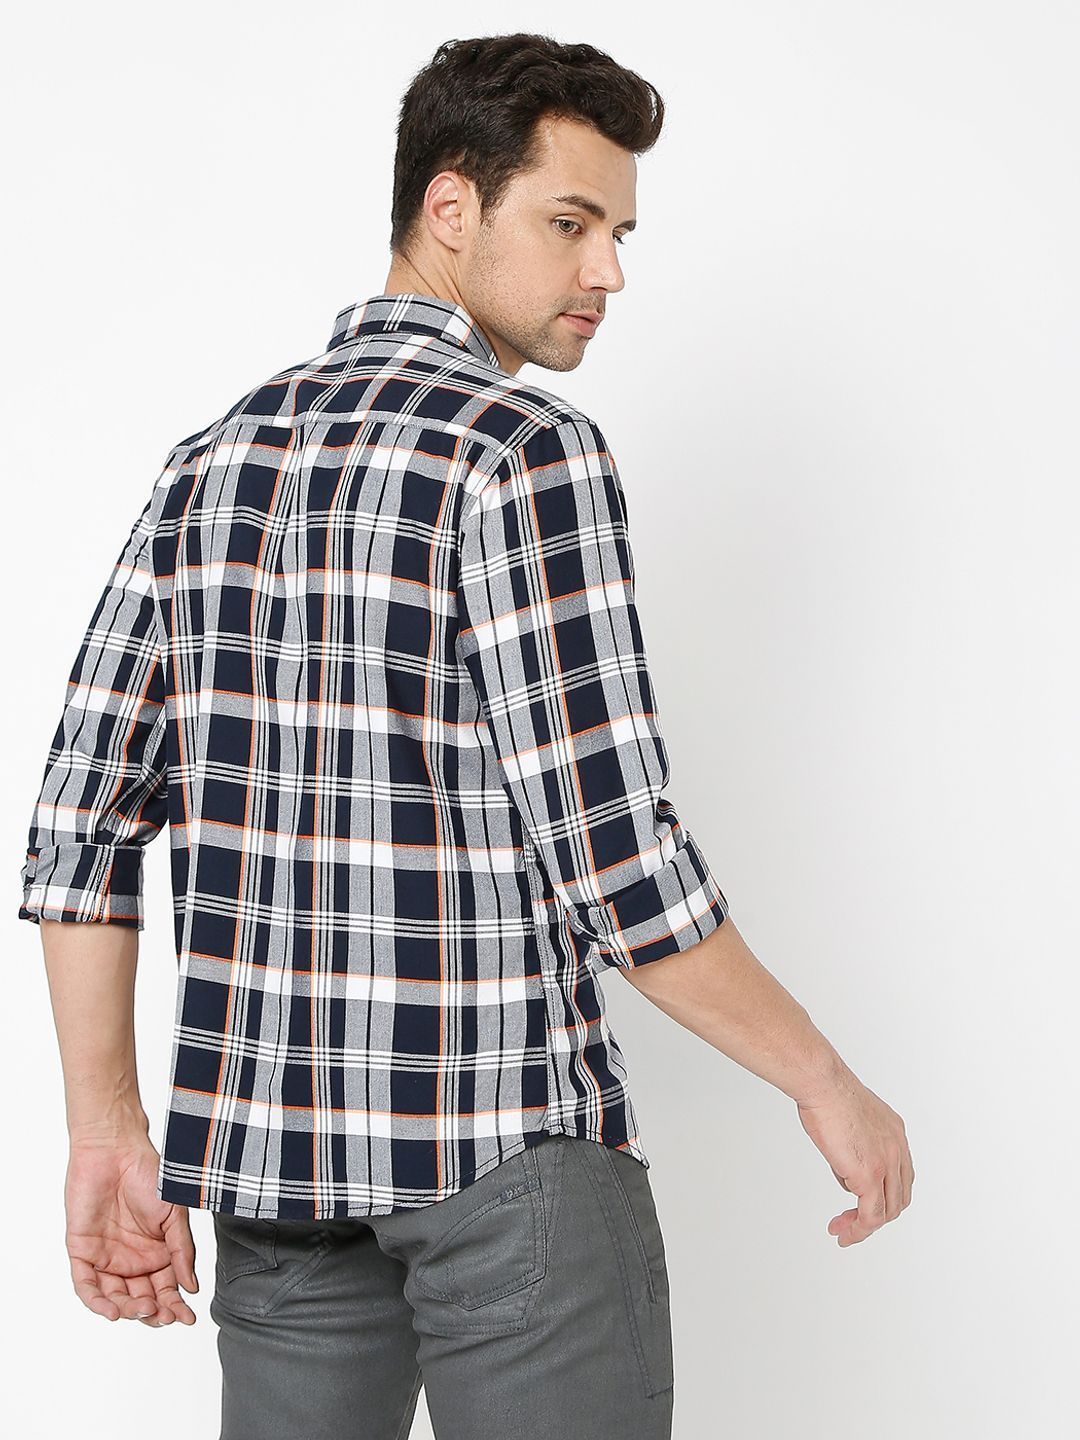 Men's S.DET CHECKERED IN relaxed fit shirt